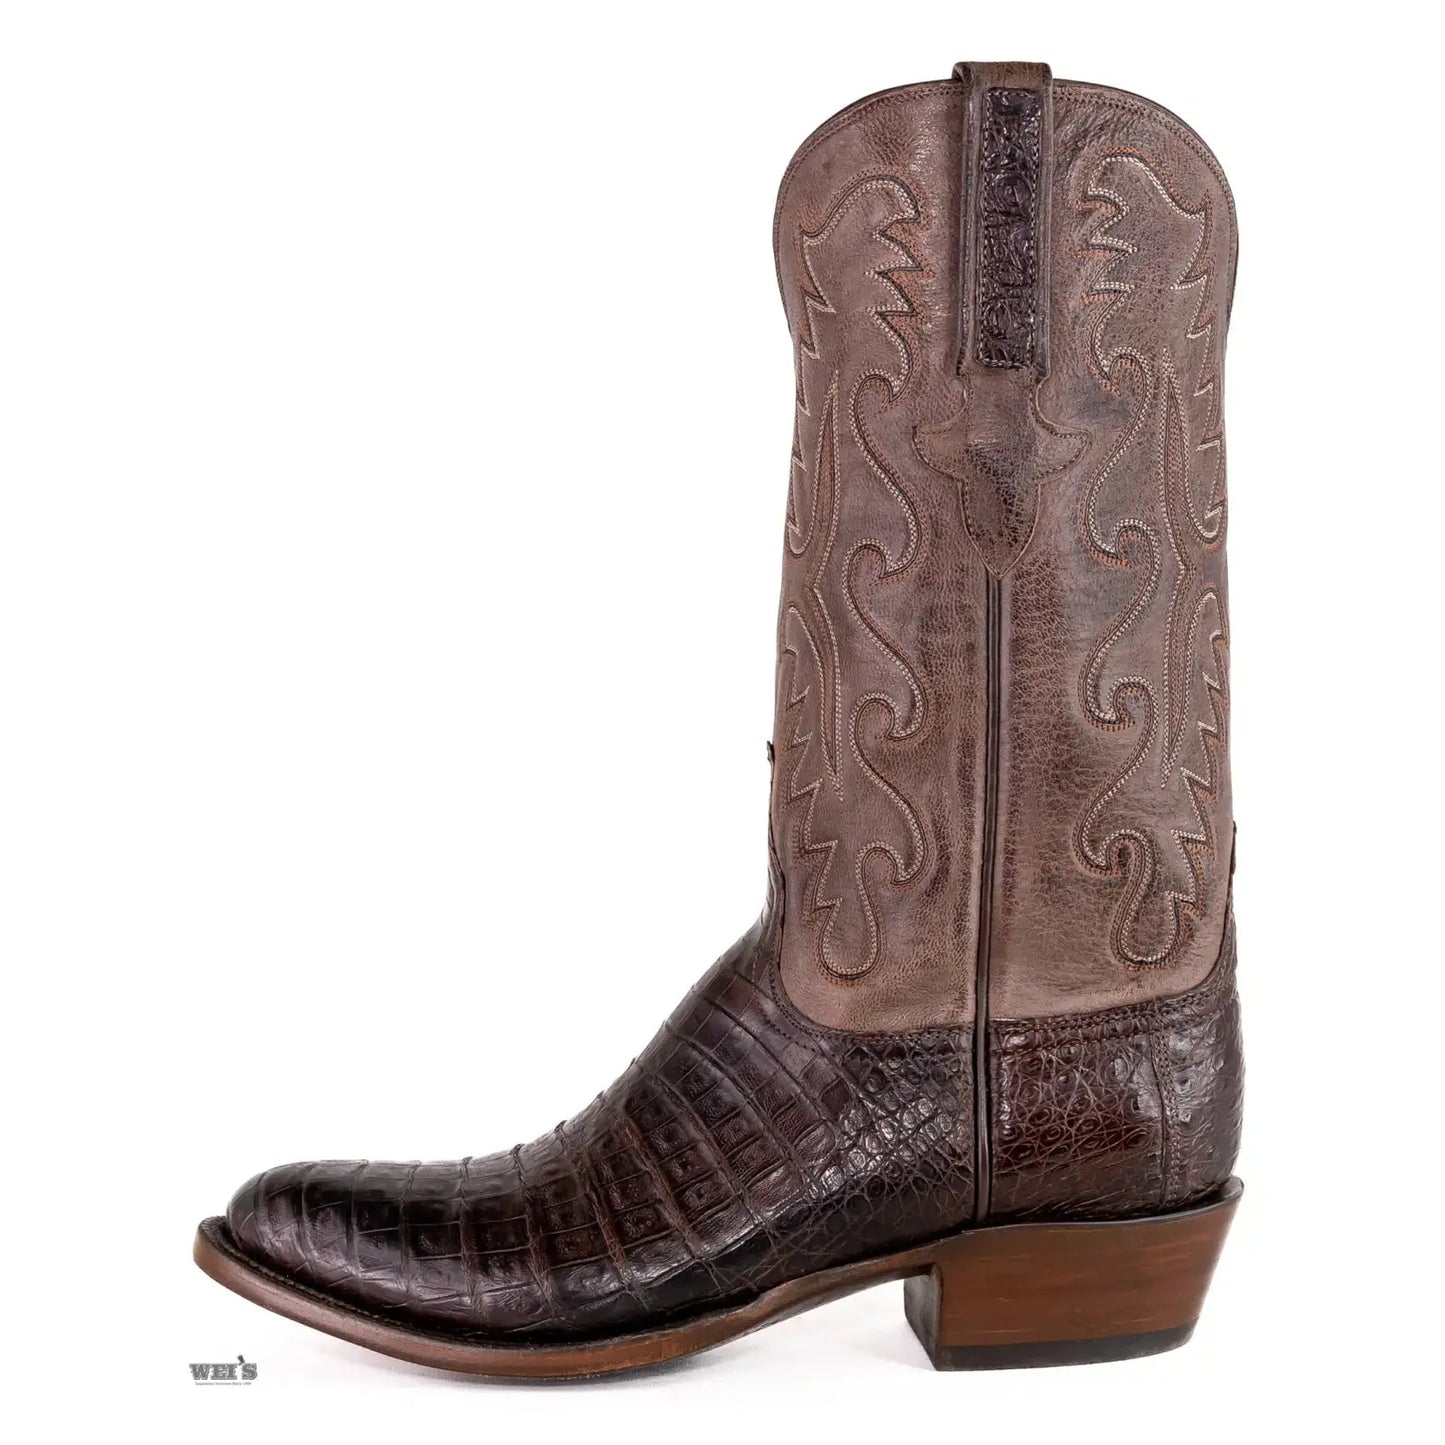 Lucchese Men's Cowboy Boots Exotic Caiman Walking Heel, Round Toe E2155.63